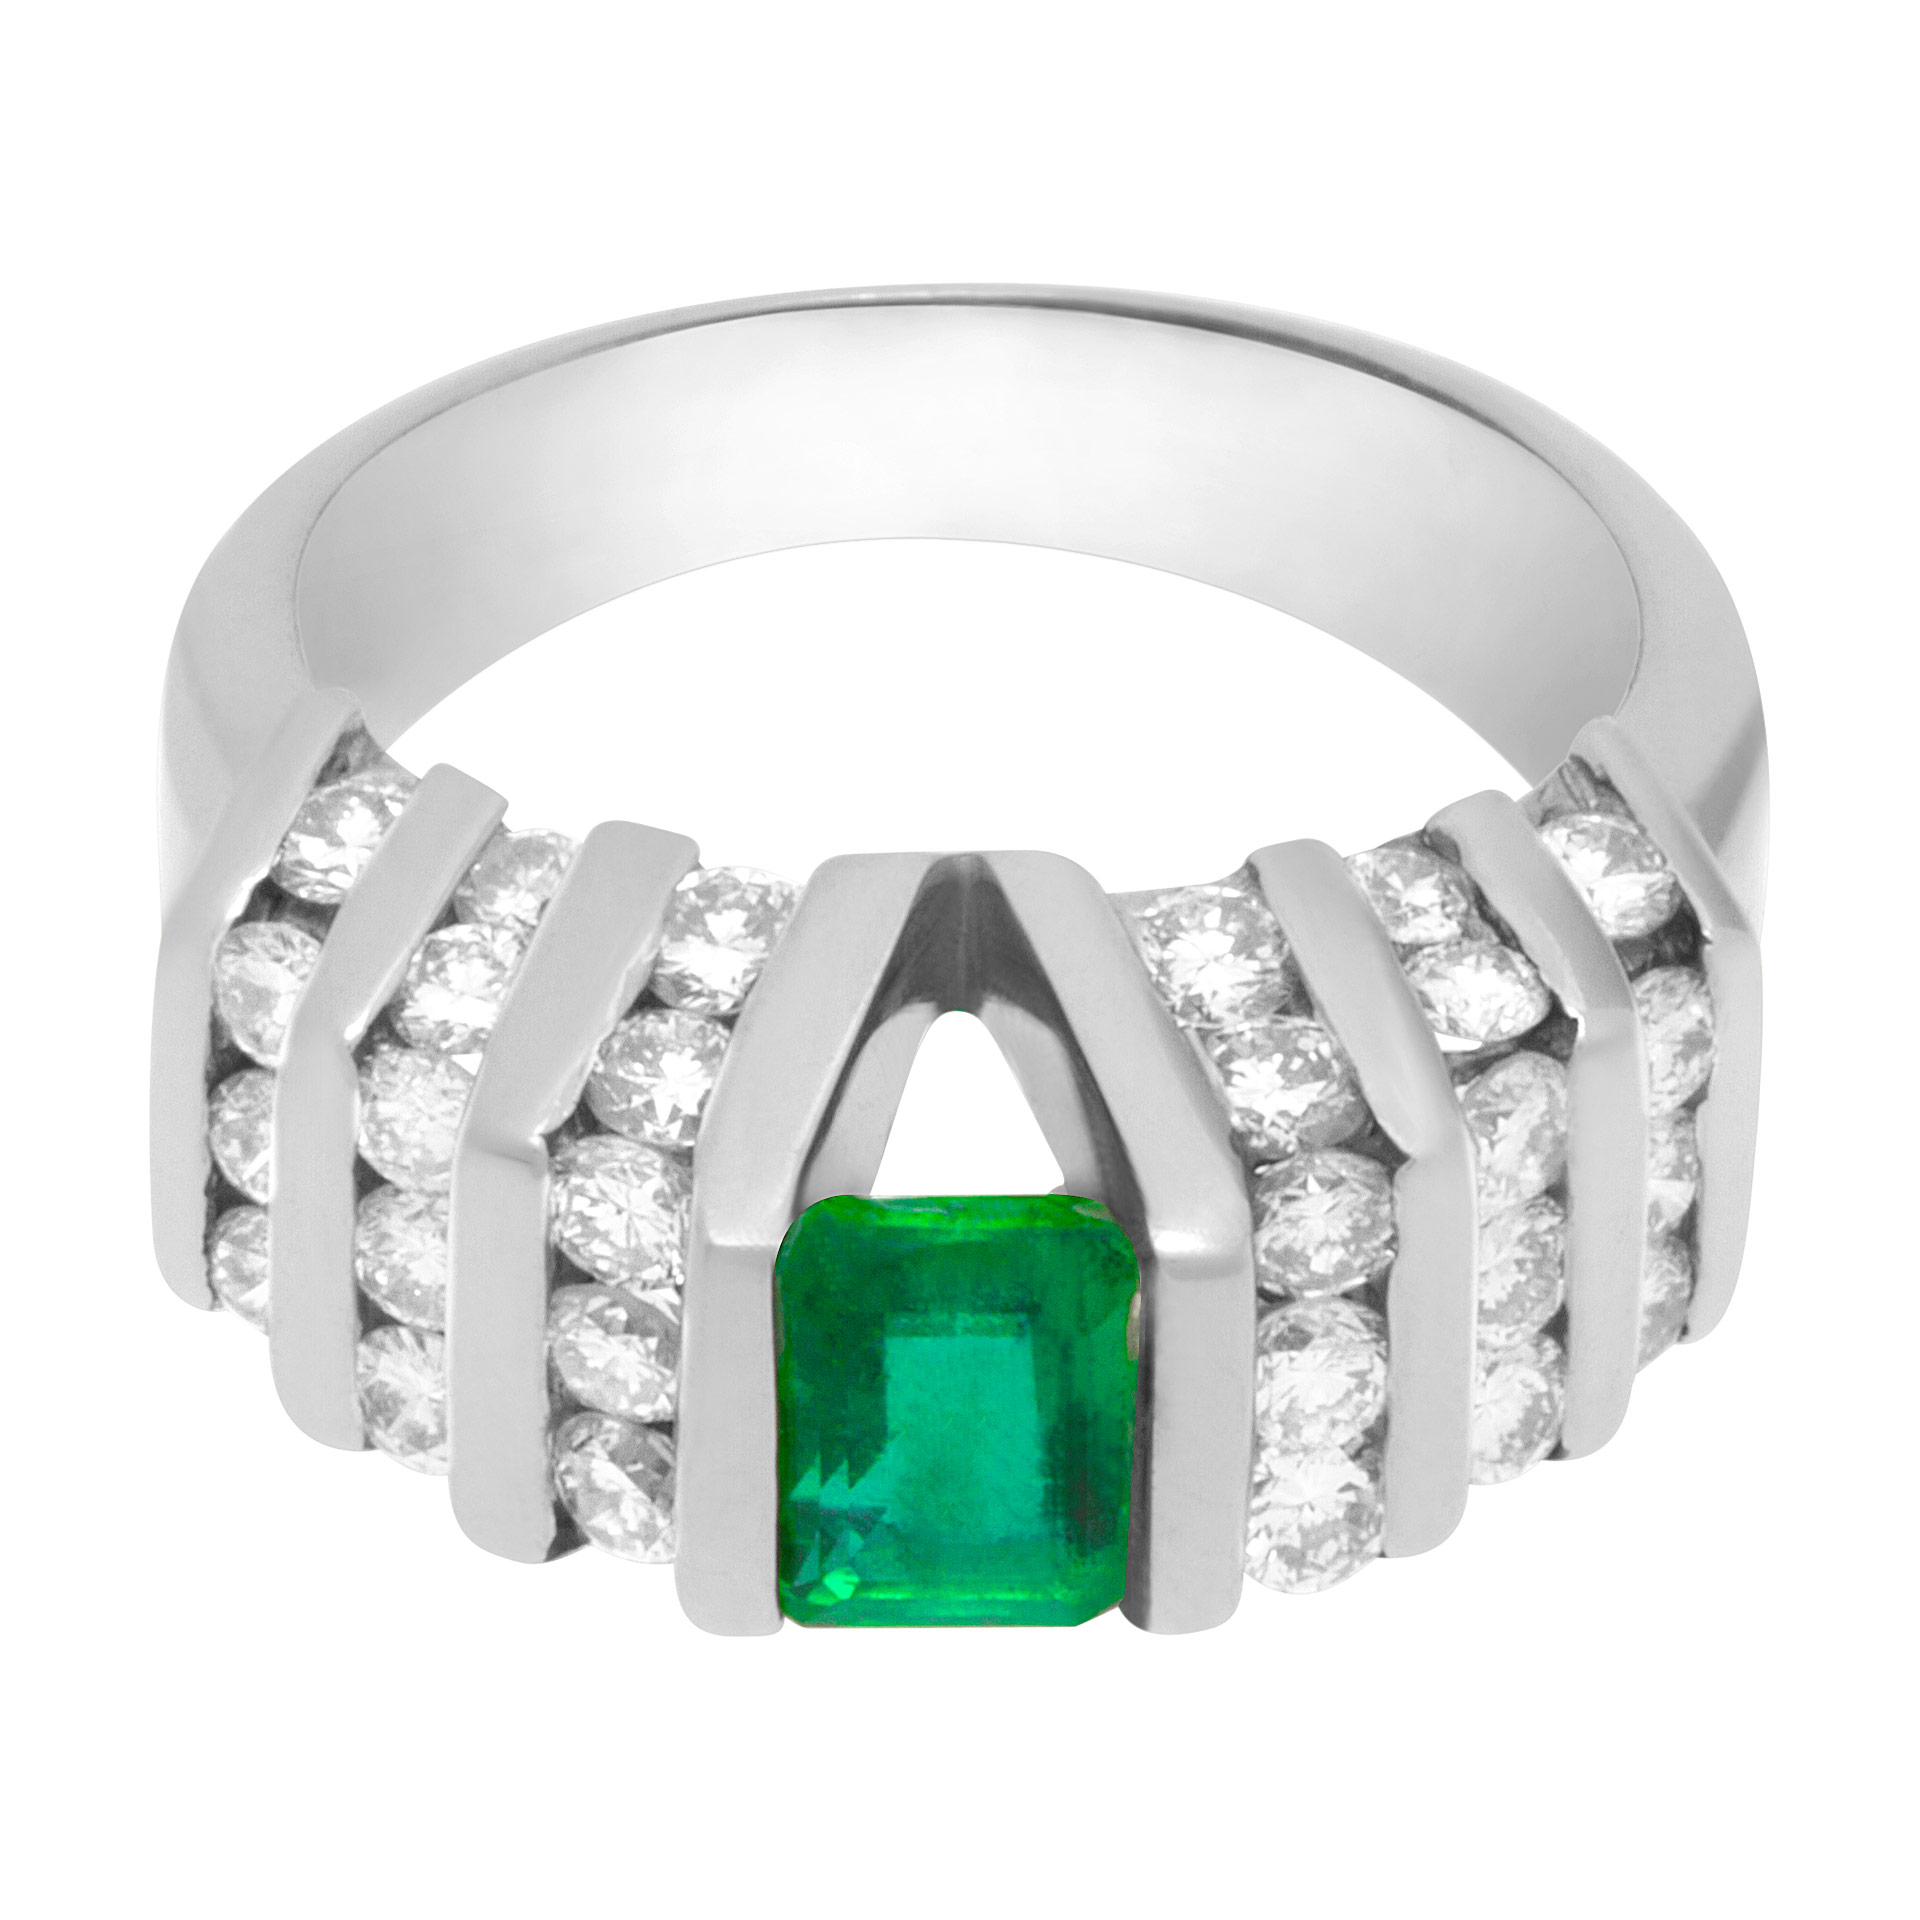 Emerald and diamond ring in 14k white gold